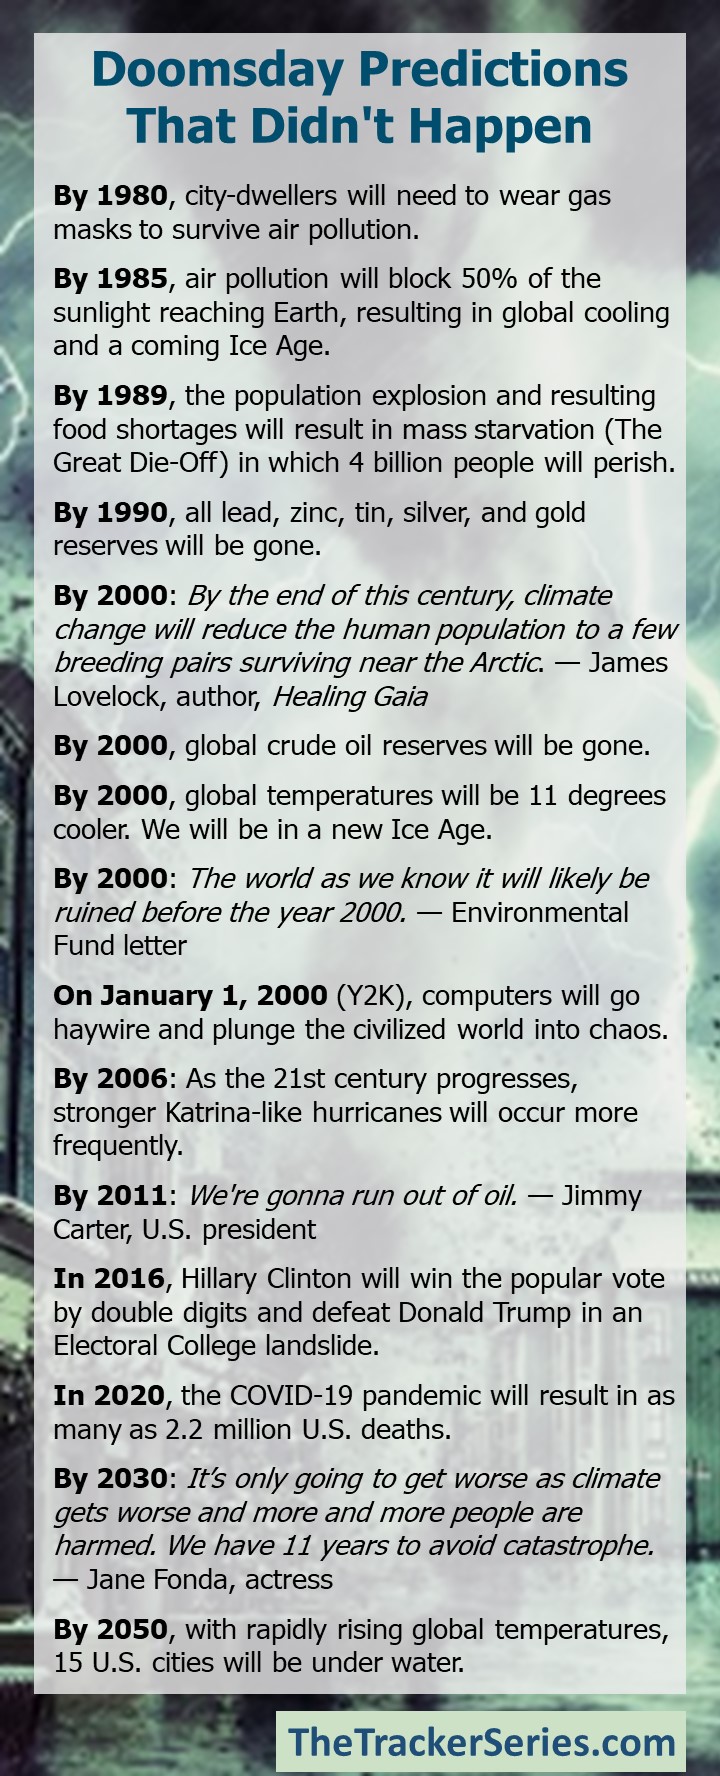 Doomsday Predictions that did not come true